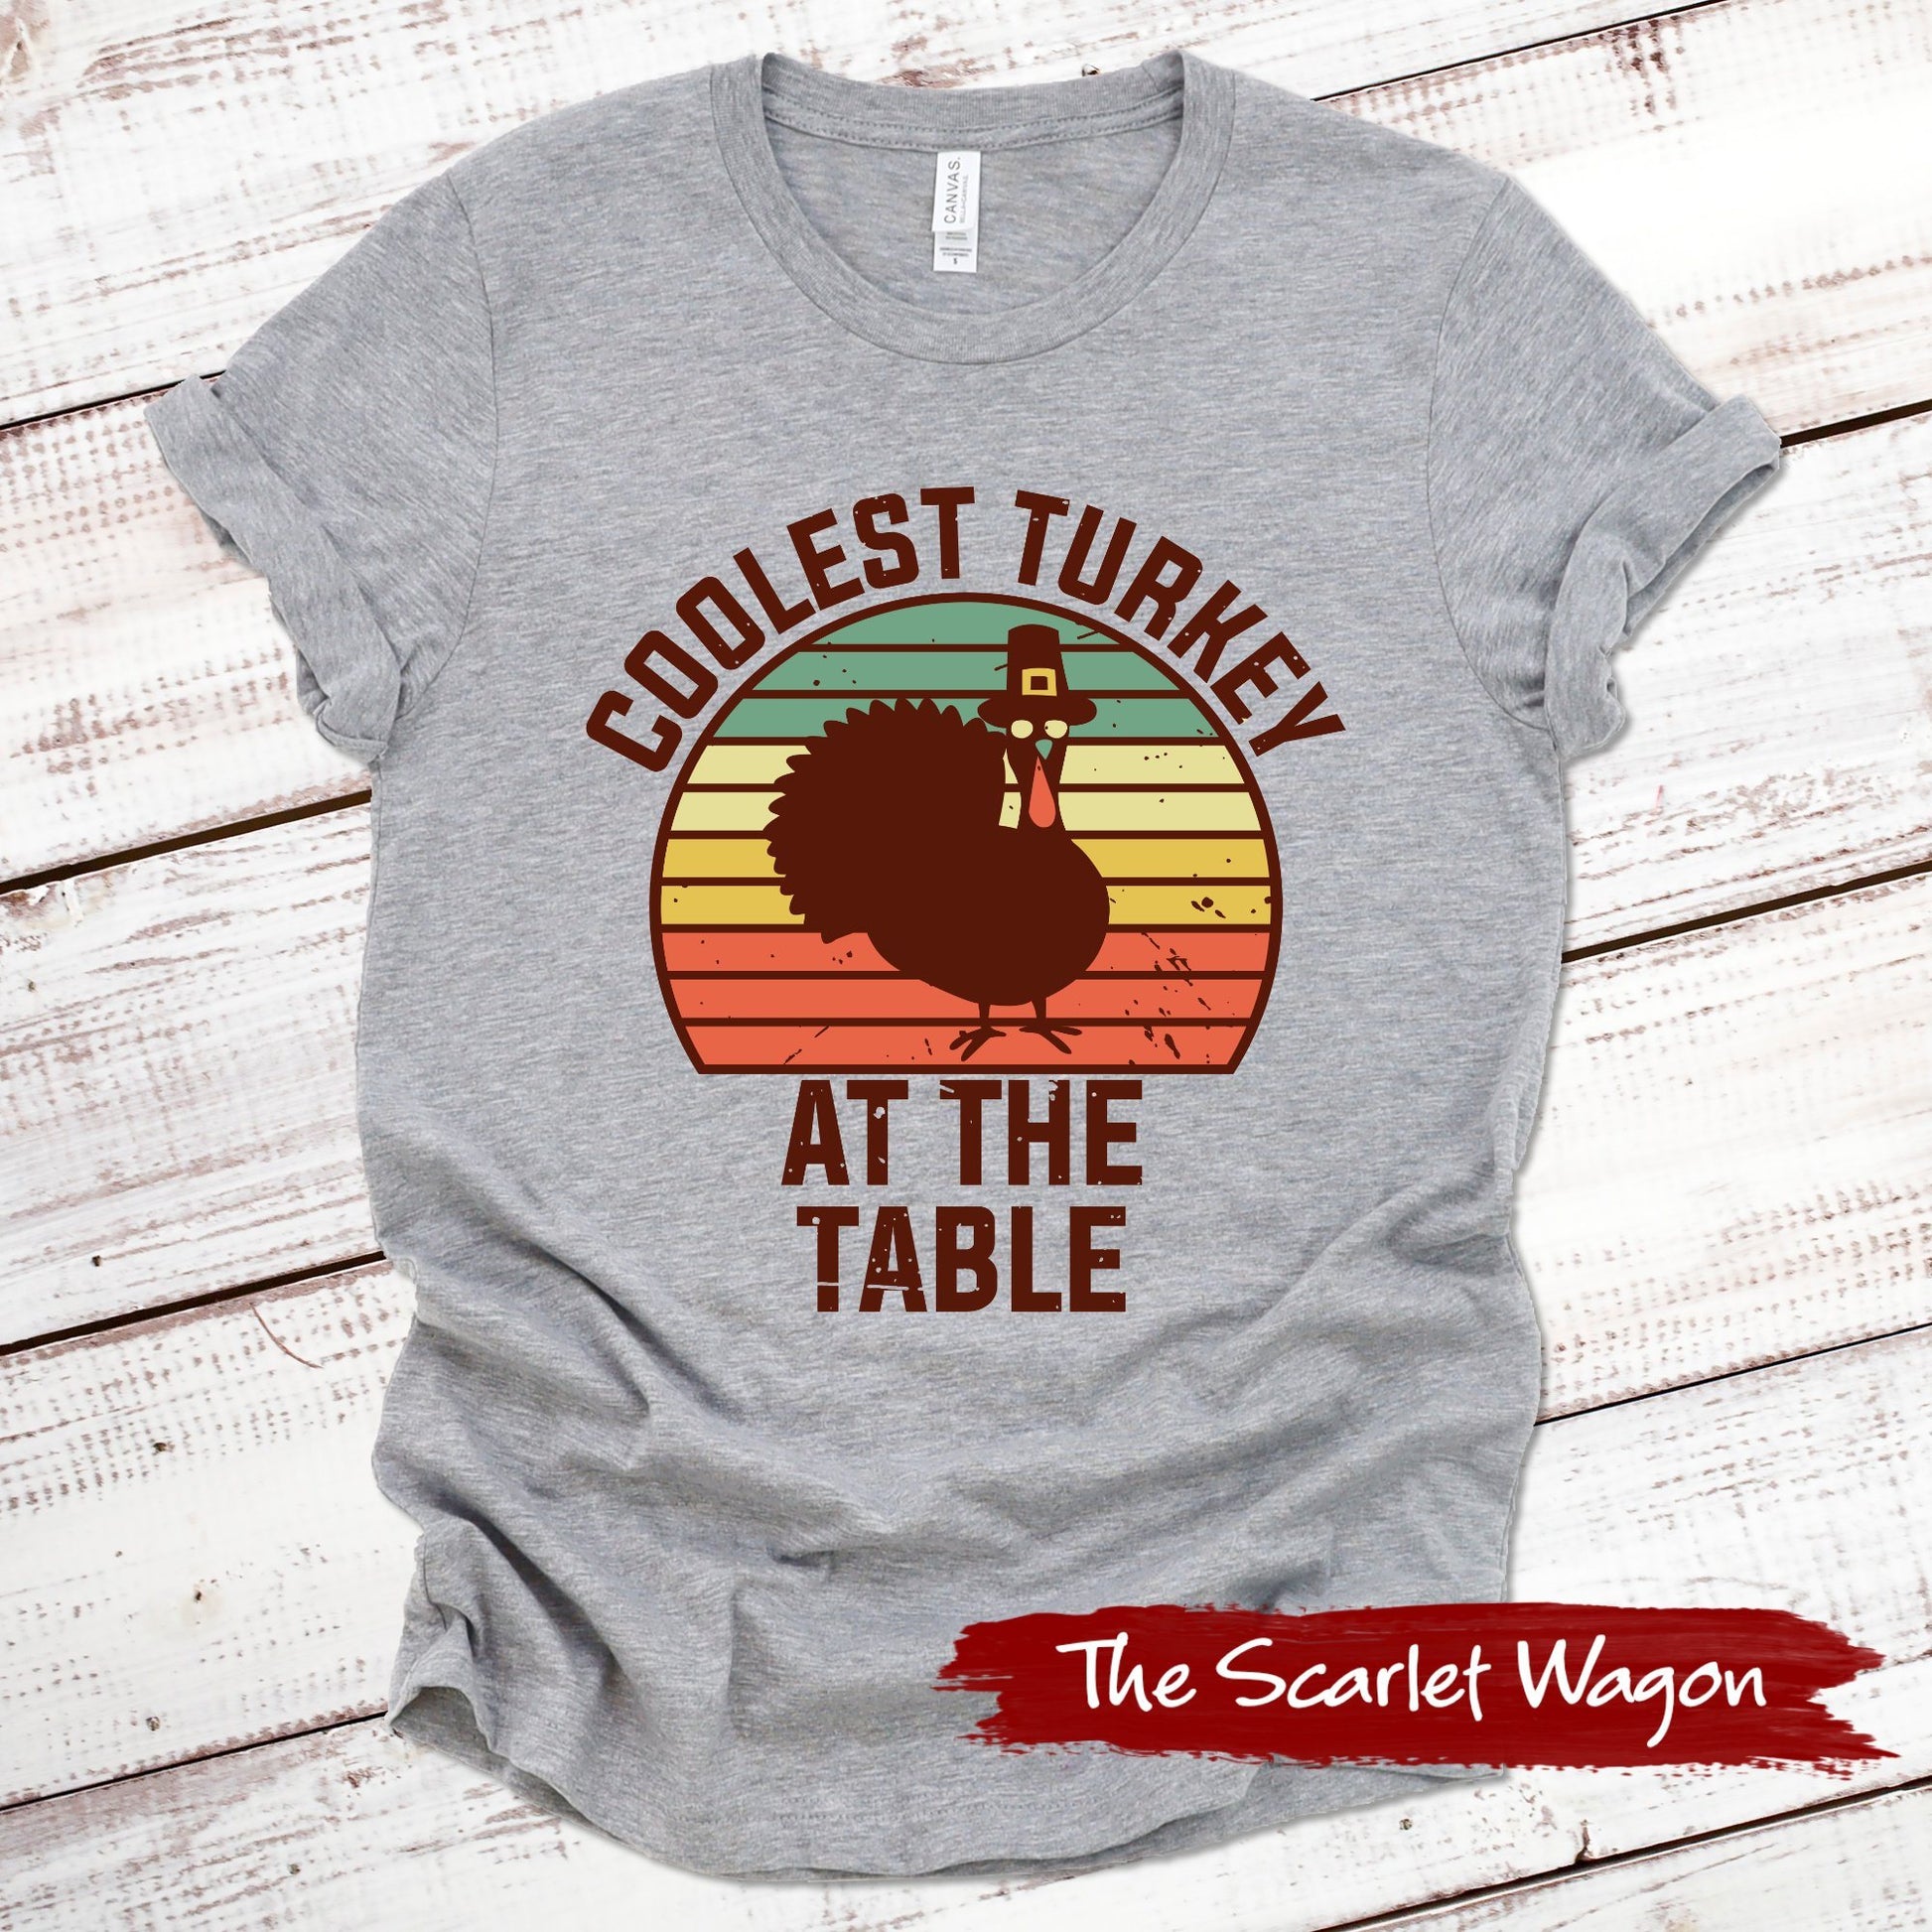 Coolest Turkey at the Table Fall Shirts Scarlet Wagon Athletic Heather XS 